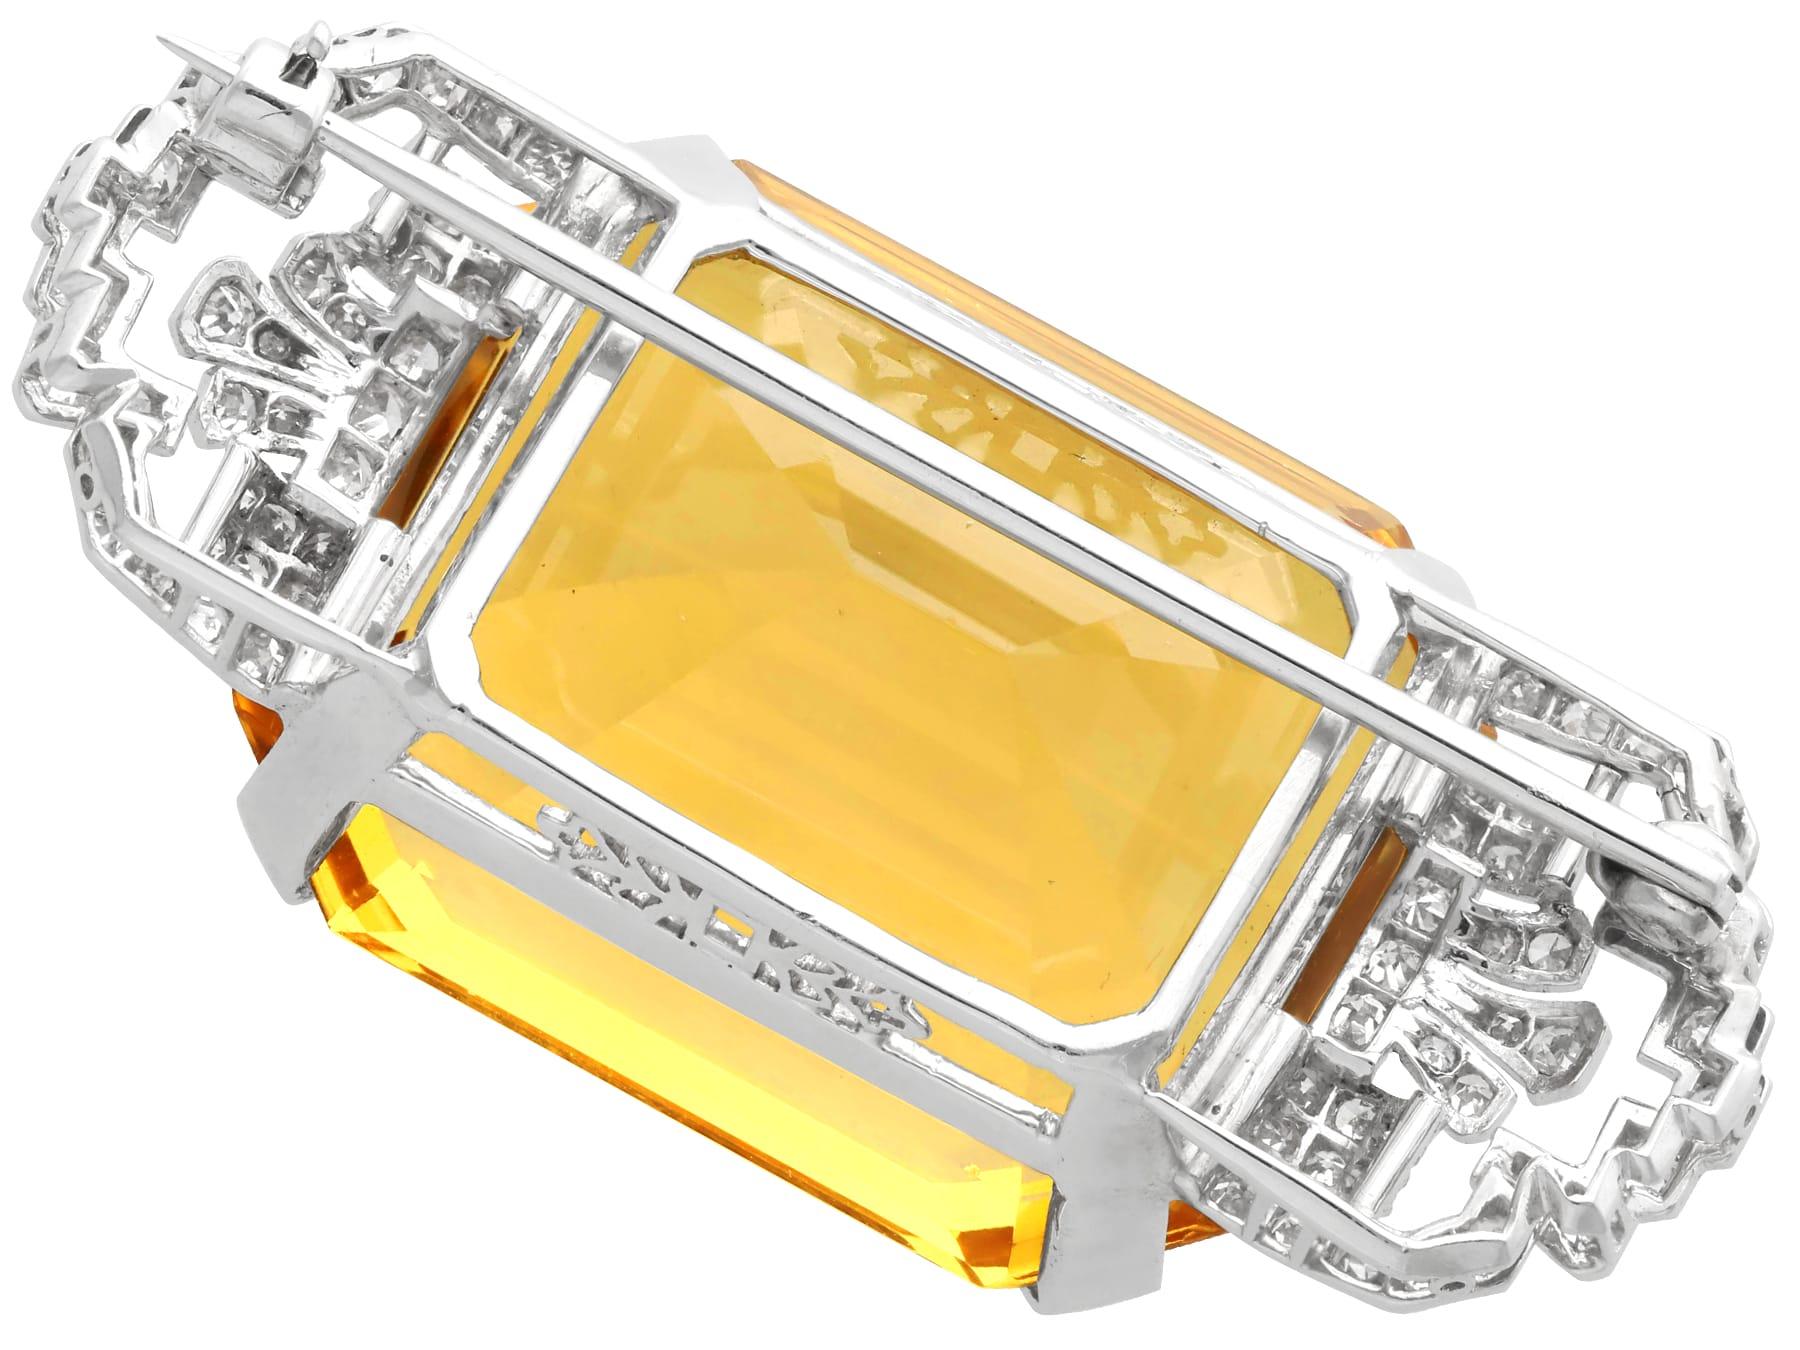 Antique Art Deco 77.42ct Citrine and 1.16ct Diamond Platinum Brooch Circa 1935 In Excellent Condition For Sale In Jesmond, Newcastle Upon Tyne